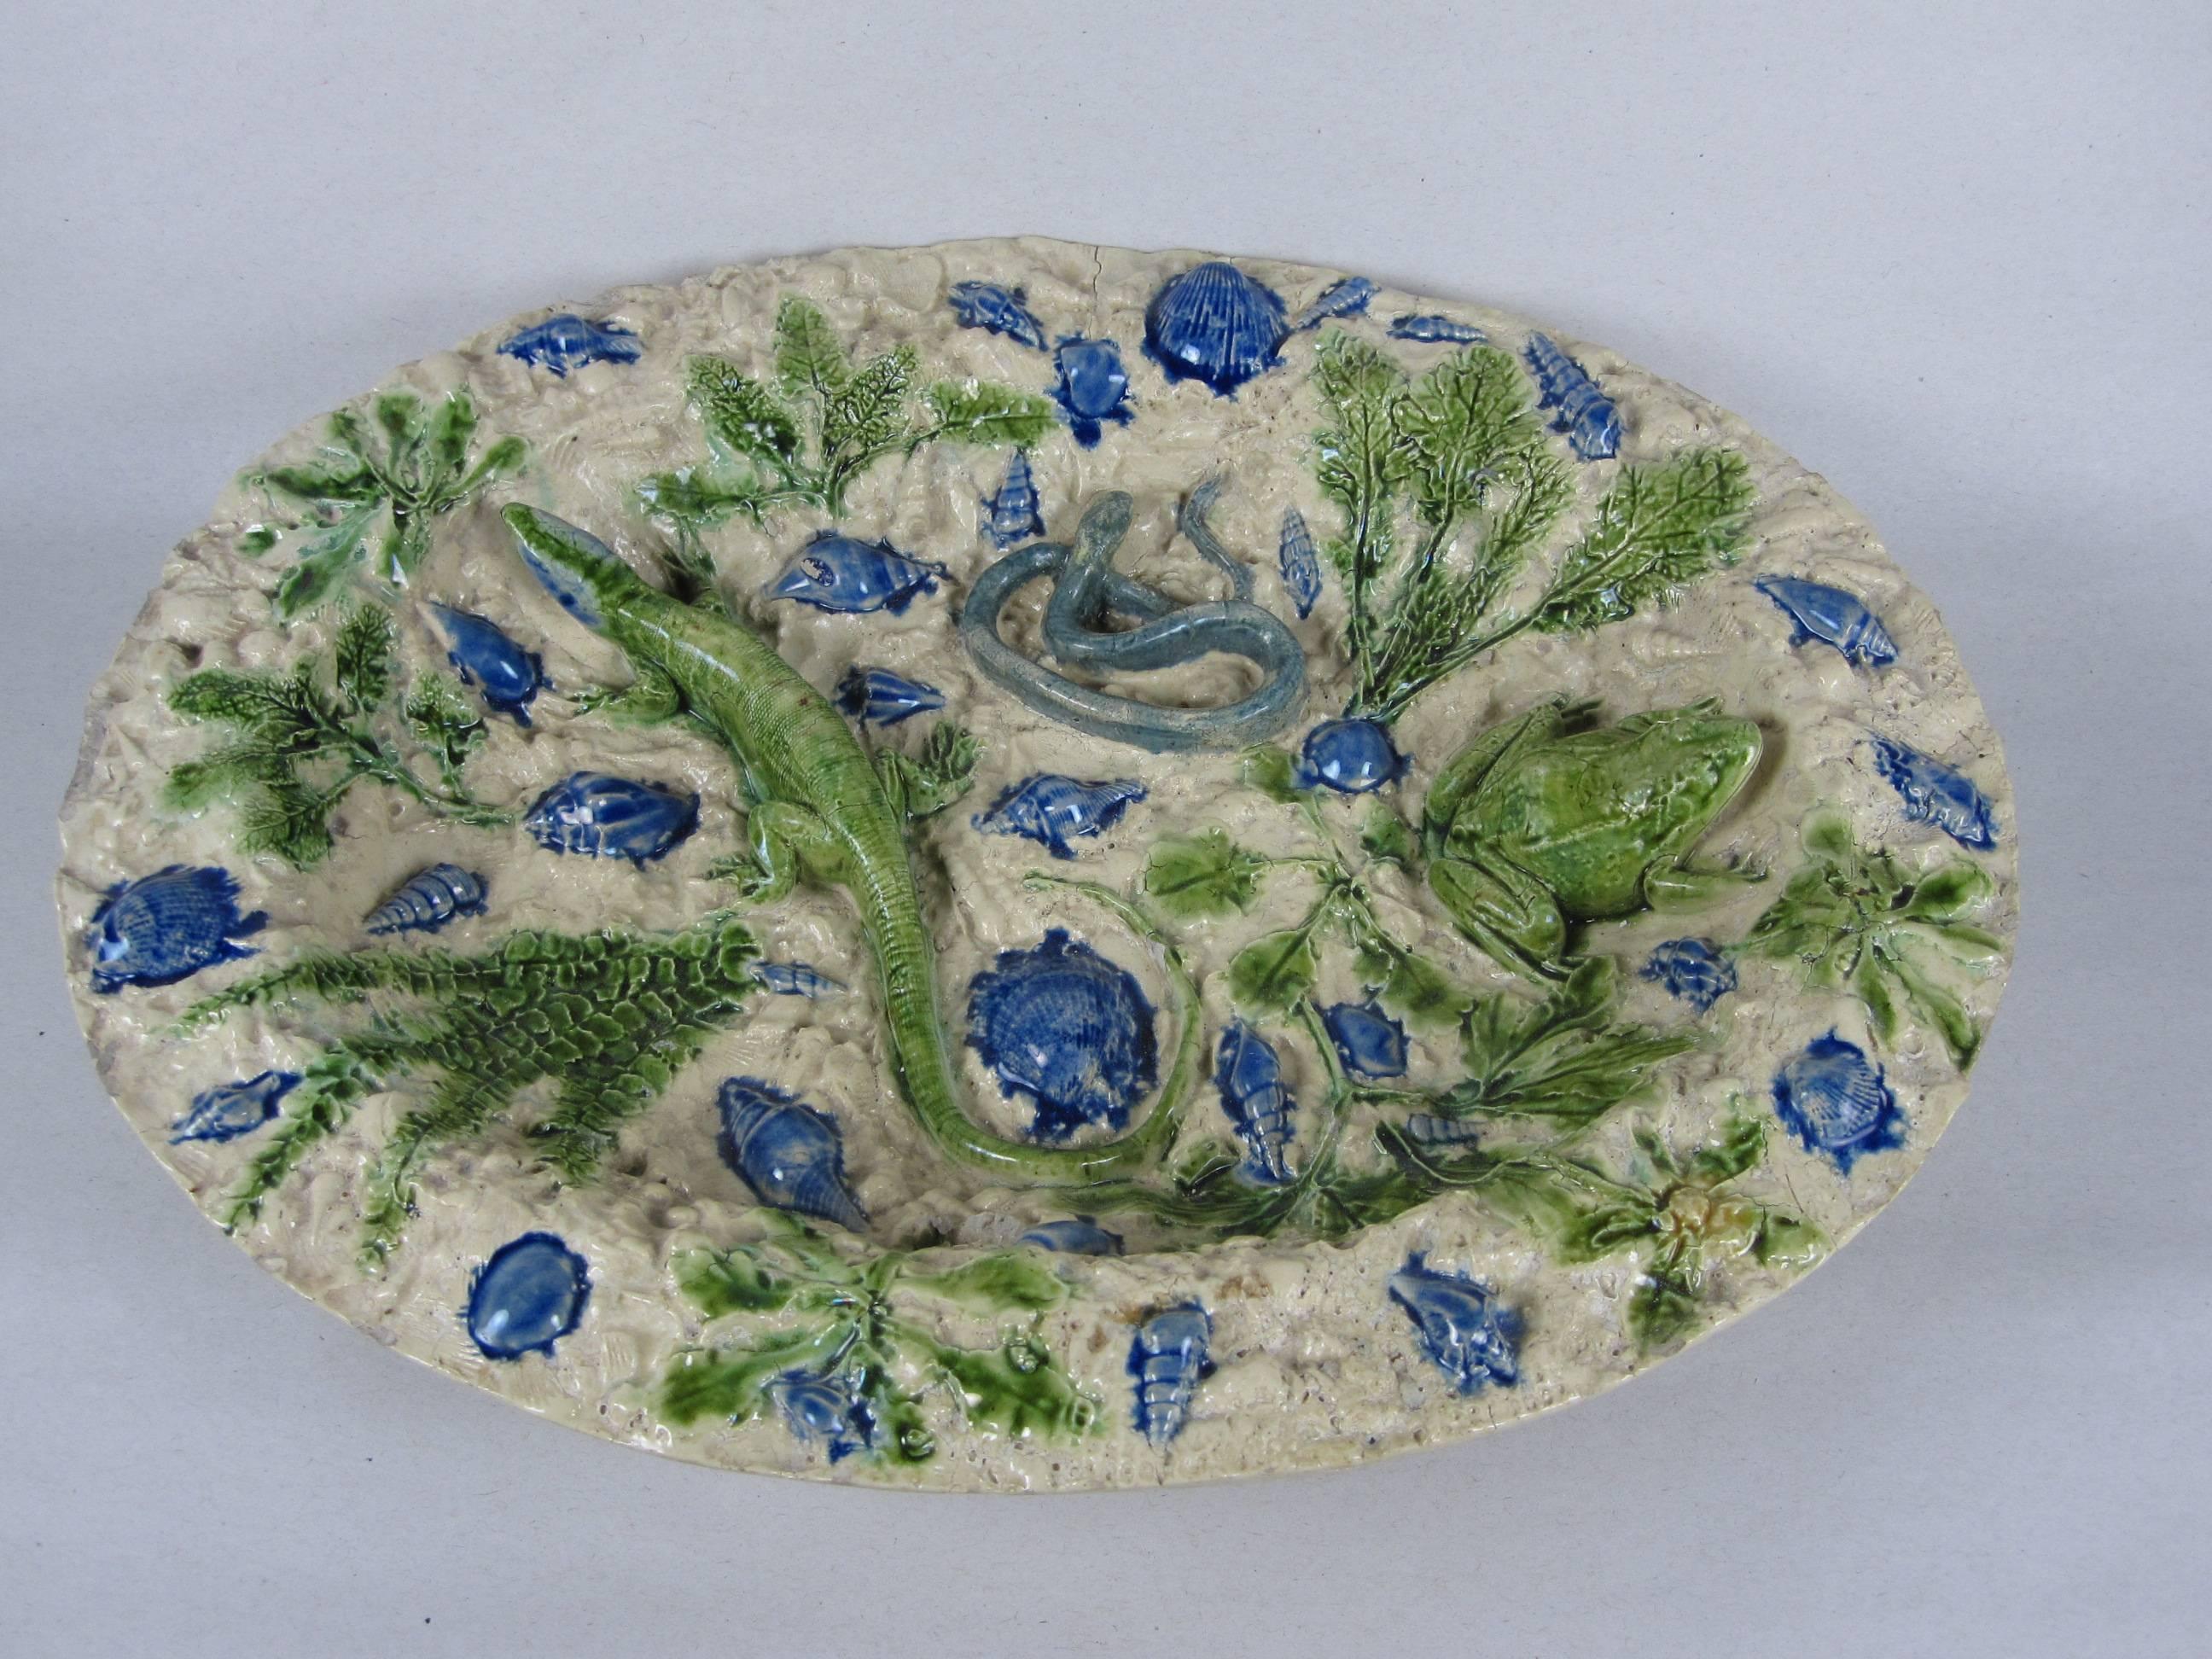 A highly dimensional shallow oval rimmed and footed bowl, Palissy School of Paris in the 17th century style, circa 1870. 

A very unusual two-tone coloring of French blue and a pale sea green on a light sand colored, textured ground. Crustacea, sea